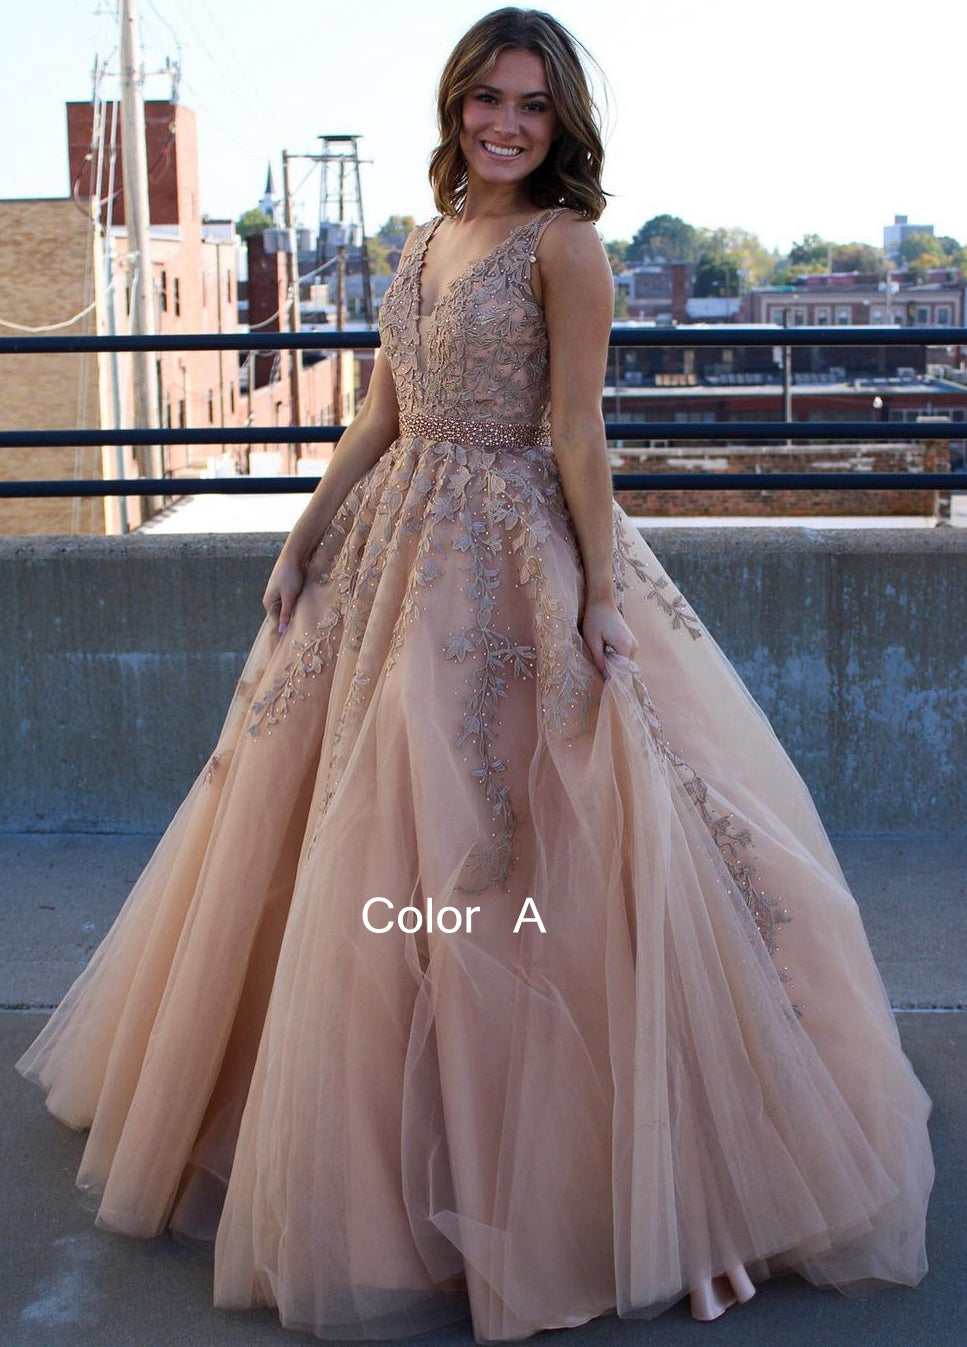 V-neck Long Prom Dresses with Appliques and Beading Fashion Formal Dress BP006